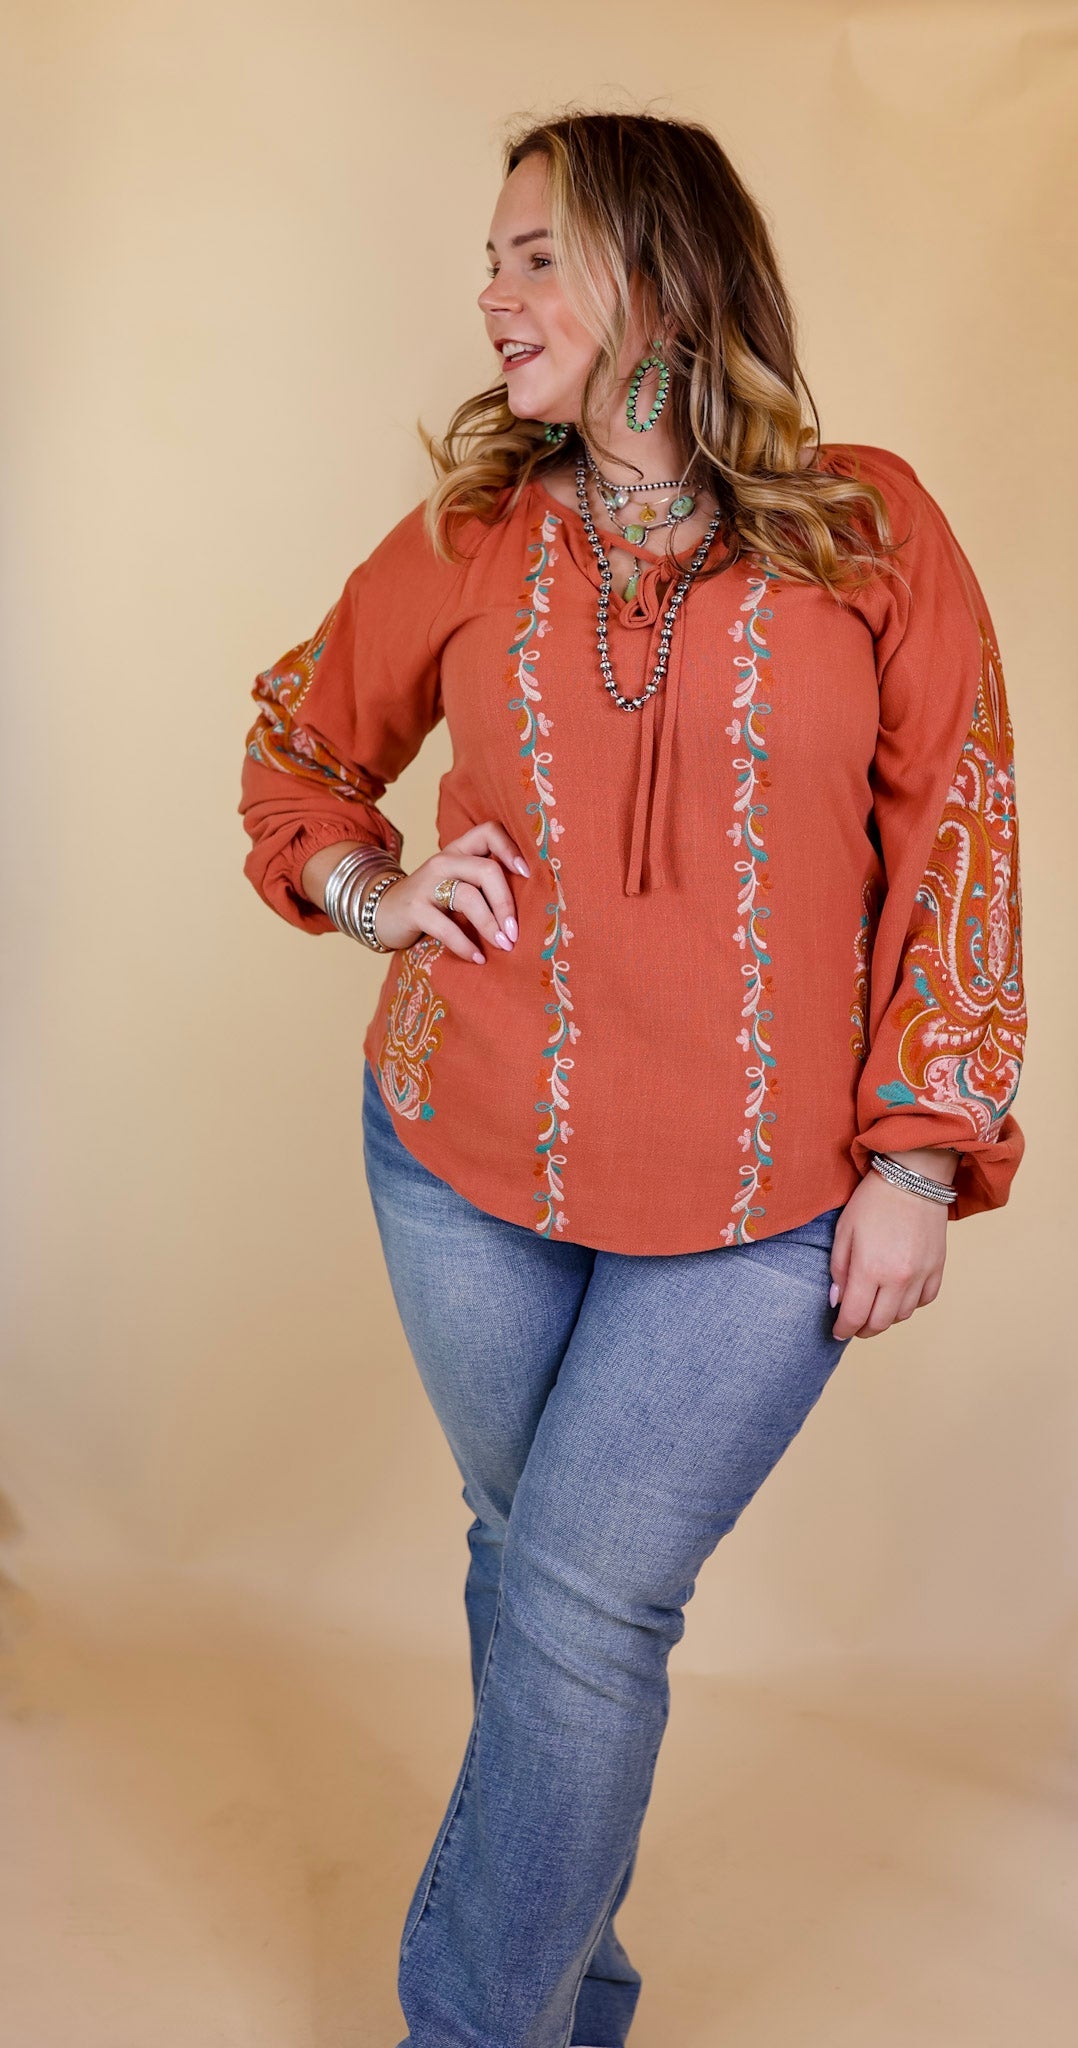 Warm Personality Floral Embroidered Long Sleeve Top with Front Keyhole and Tie in Clay Orange - Giddy Up Glamour Boutique